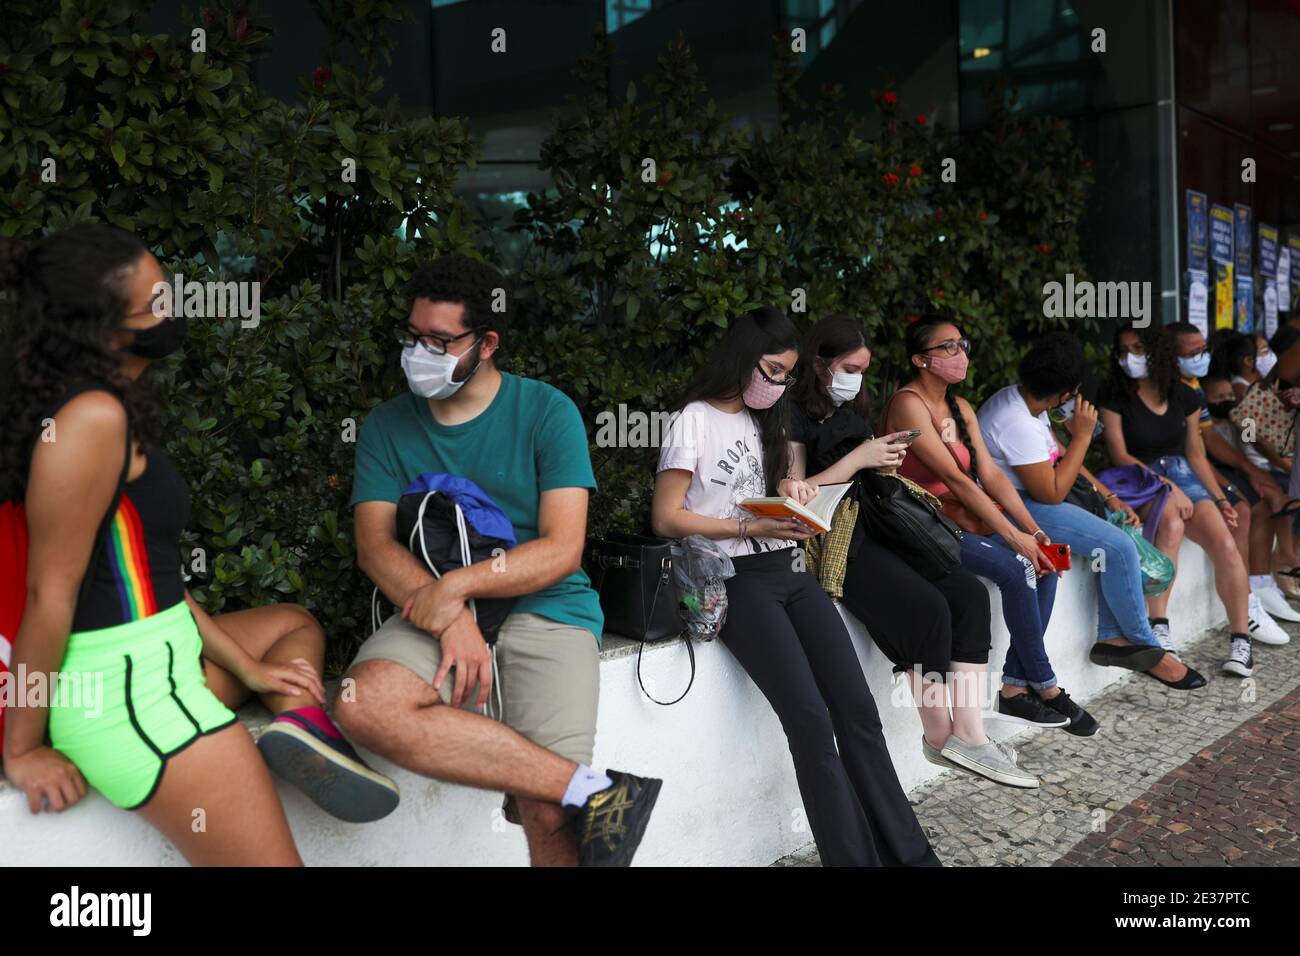 A student reads a book as people gather before the beginning of the ENEM, Exame Nacional do Ensino Medio (National High School Exam), during the outbreak of the coronavirus disease (COVID-19), at UNIP Vergueiro test site in Sao Paulo, Brazil January 17, 2021. REUTERS/Amanda Perobelli Stock Photo